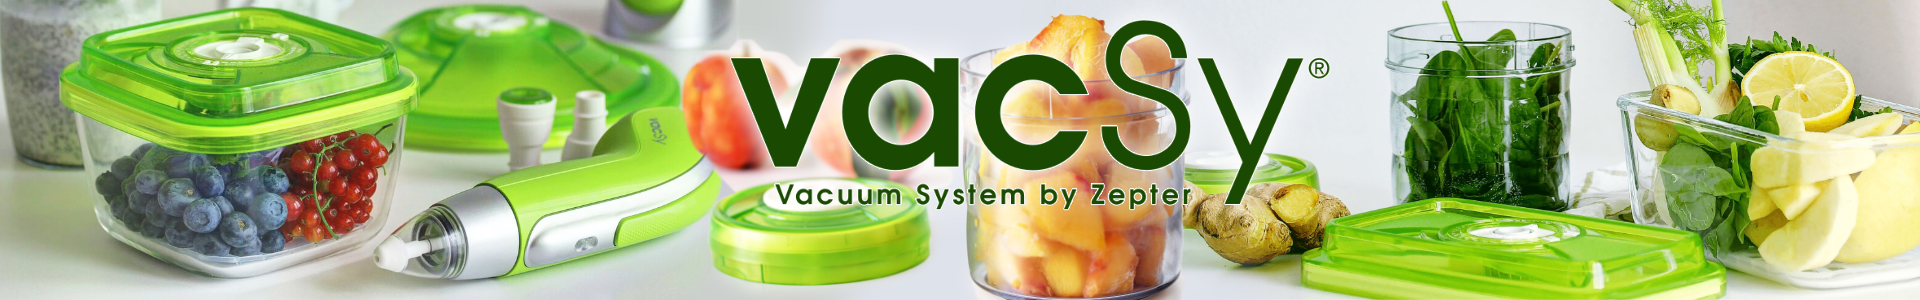 VACSY-Vacuum System by Zepter